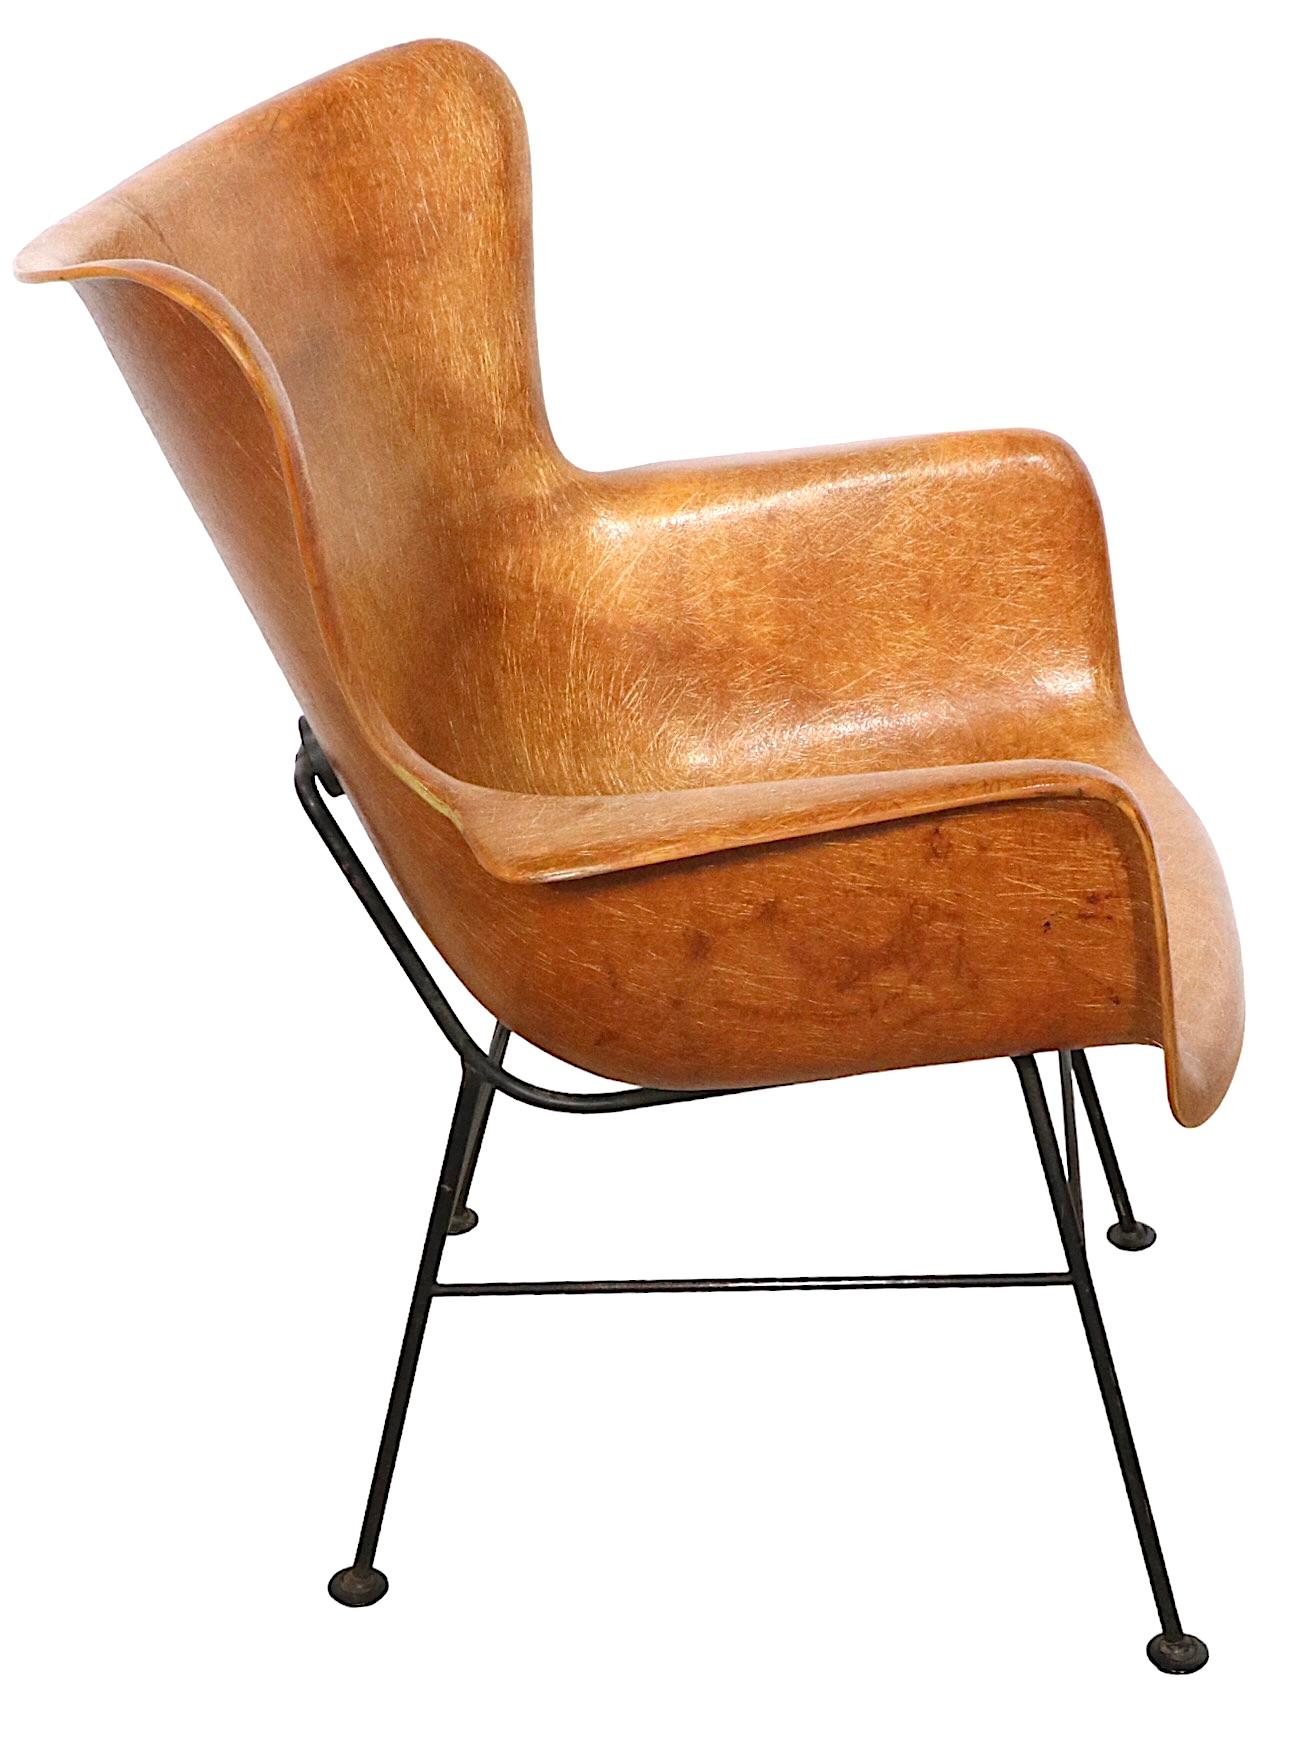 20th Century Iconic Mid Century Fiberglass Wingback Chair by Peabody for Selig, circa 1950s For Sale